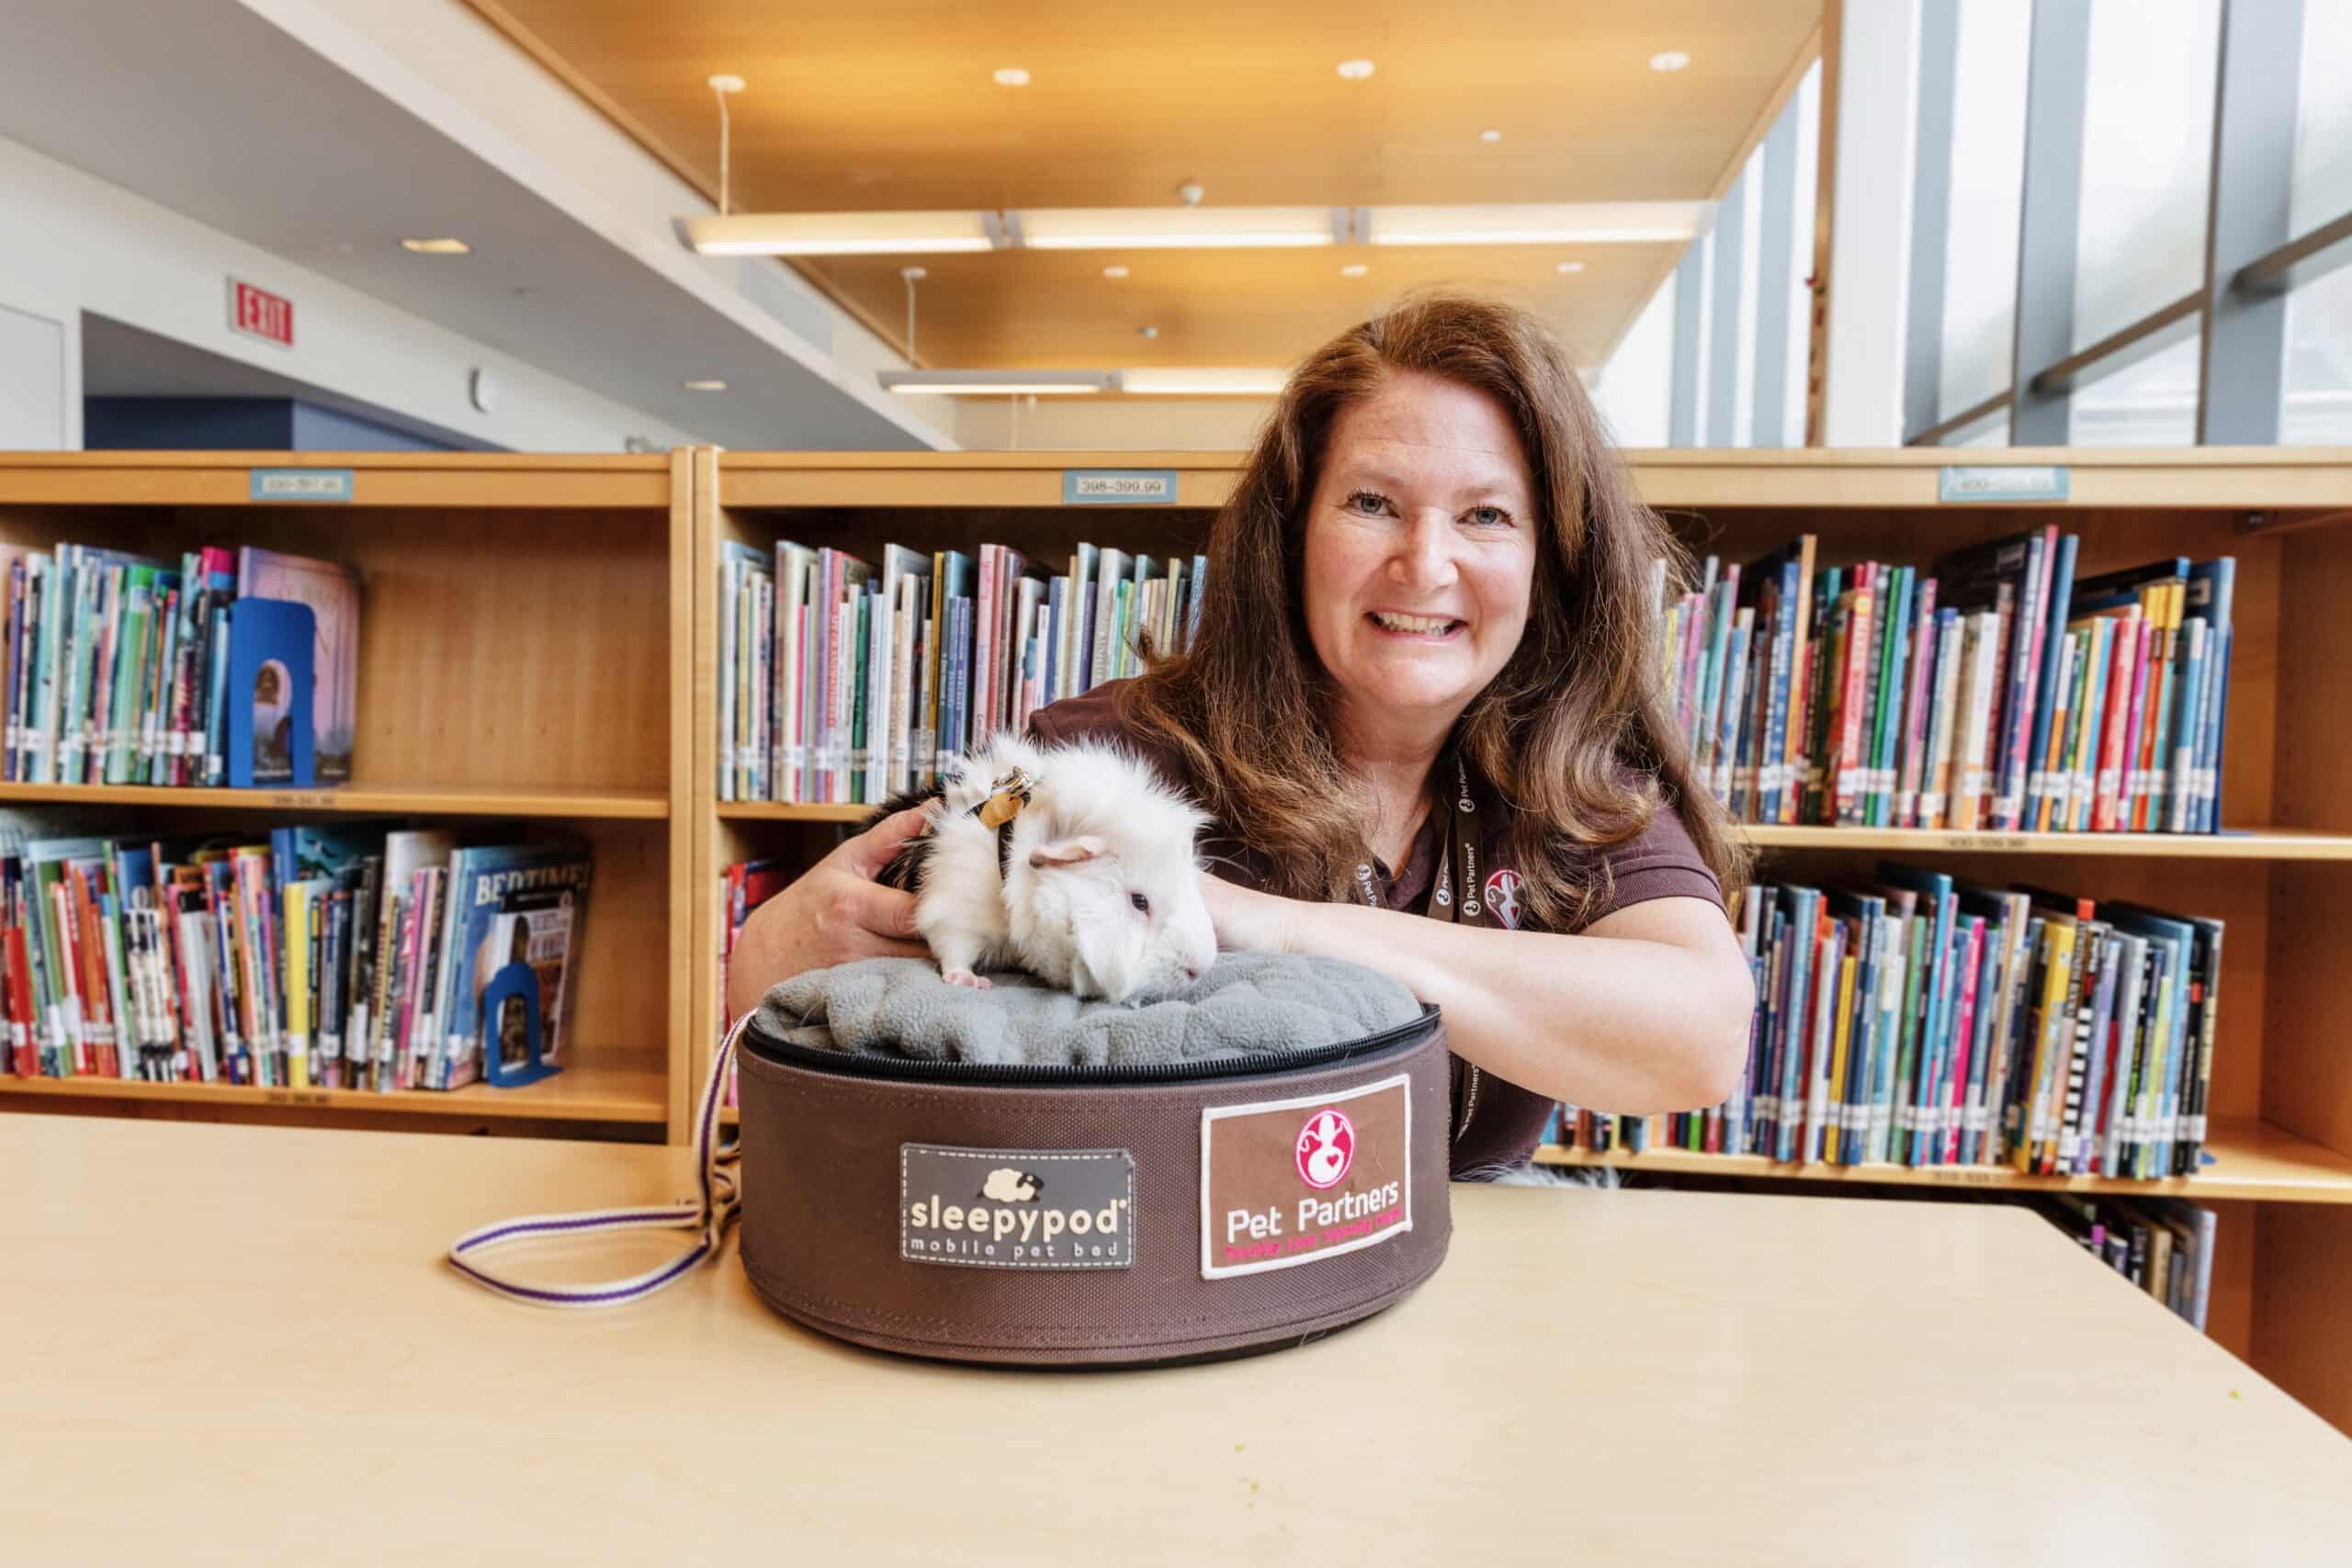 guinea pig Moo therapy animal with person in library